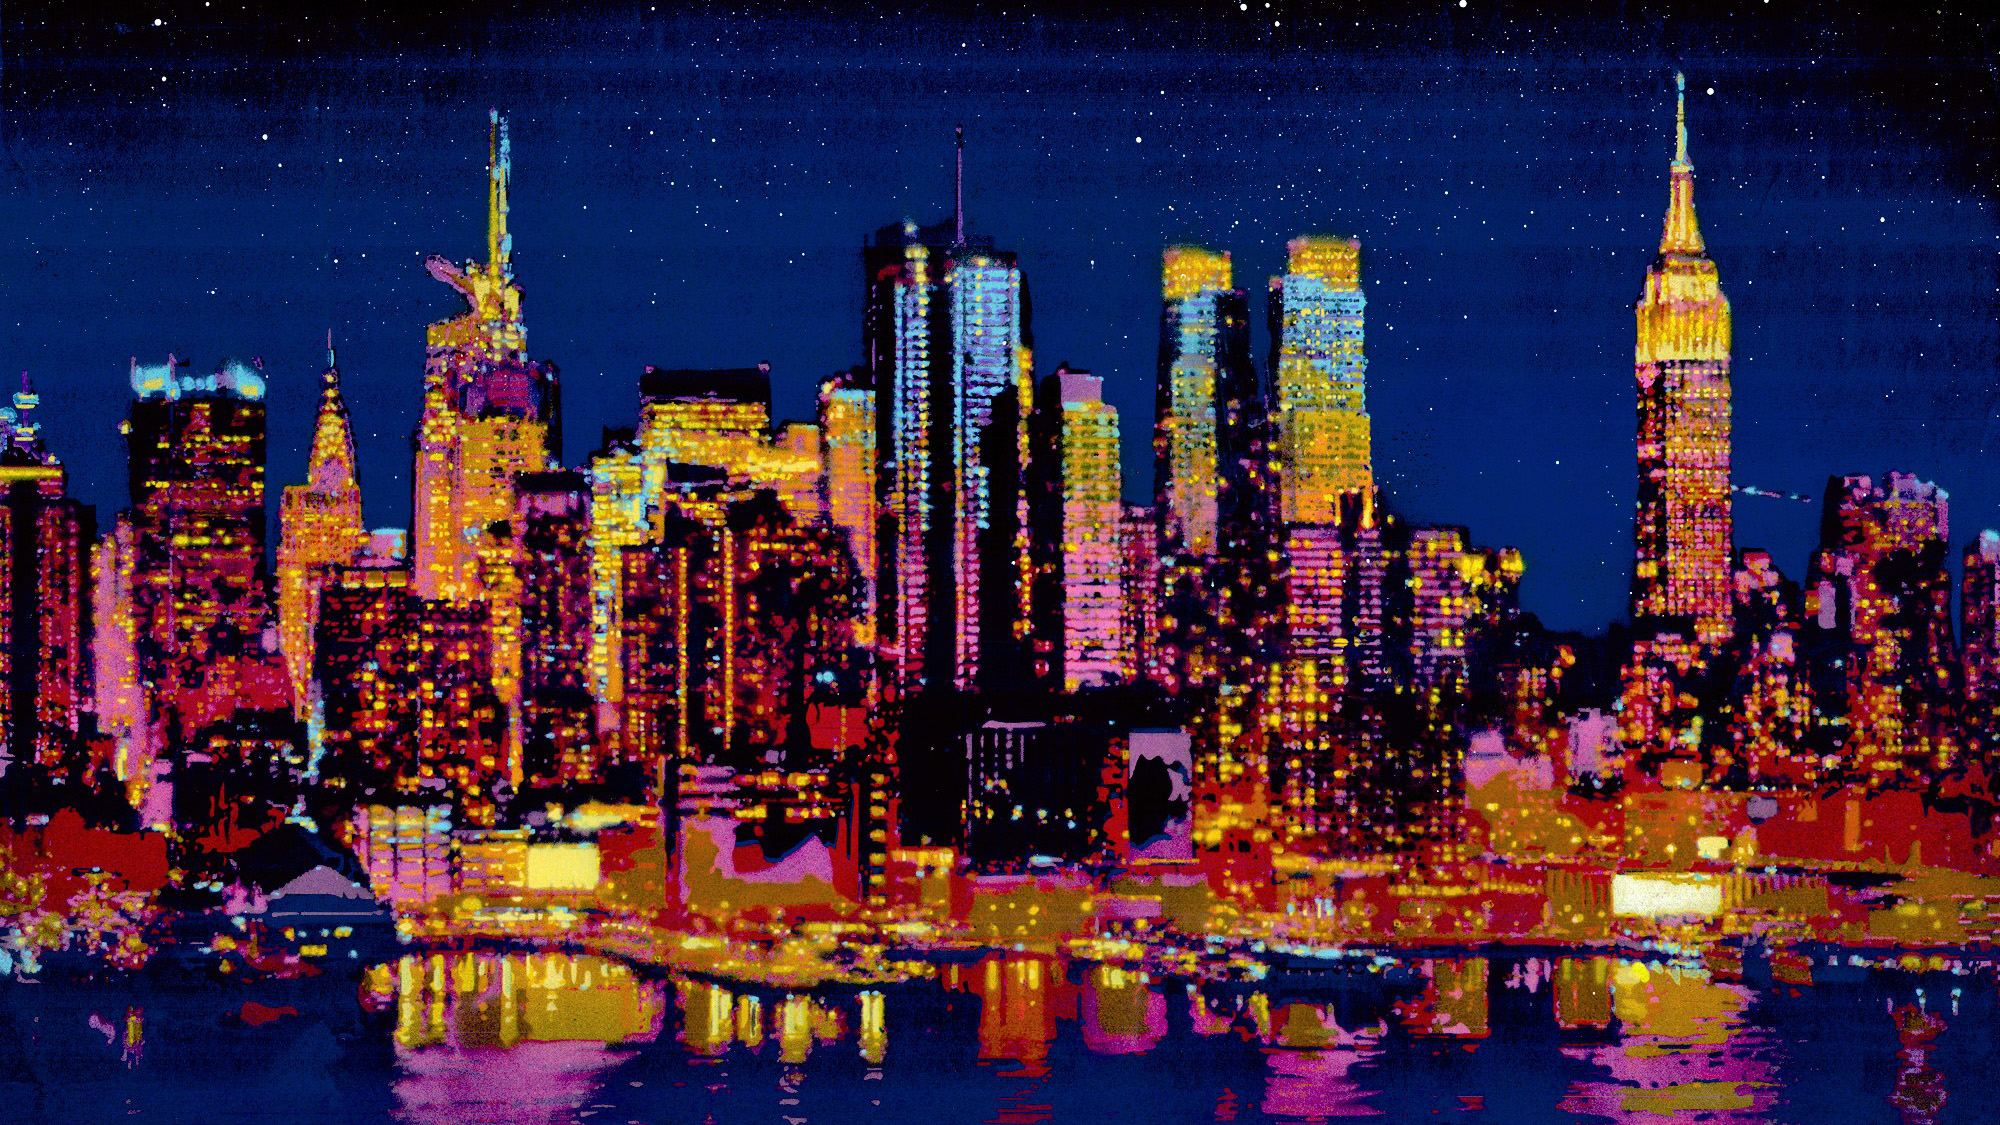 A painting of a city skyline at night with the buildings lit up with golds, pinks, and blues, and reflected in a river